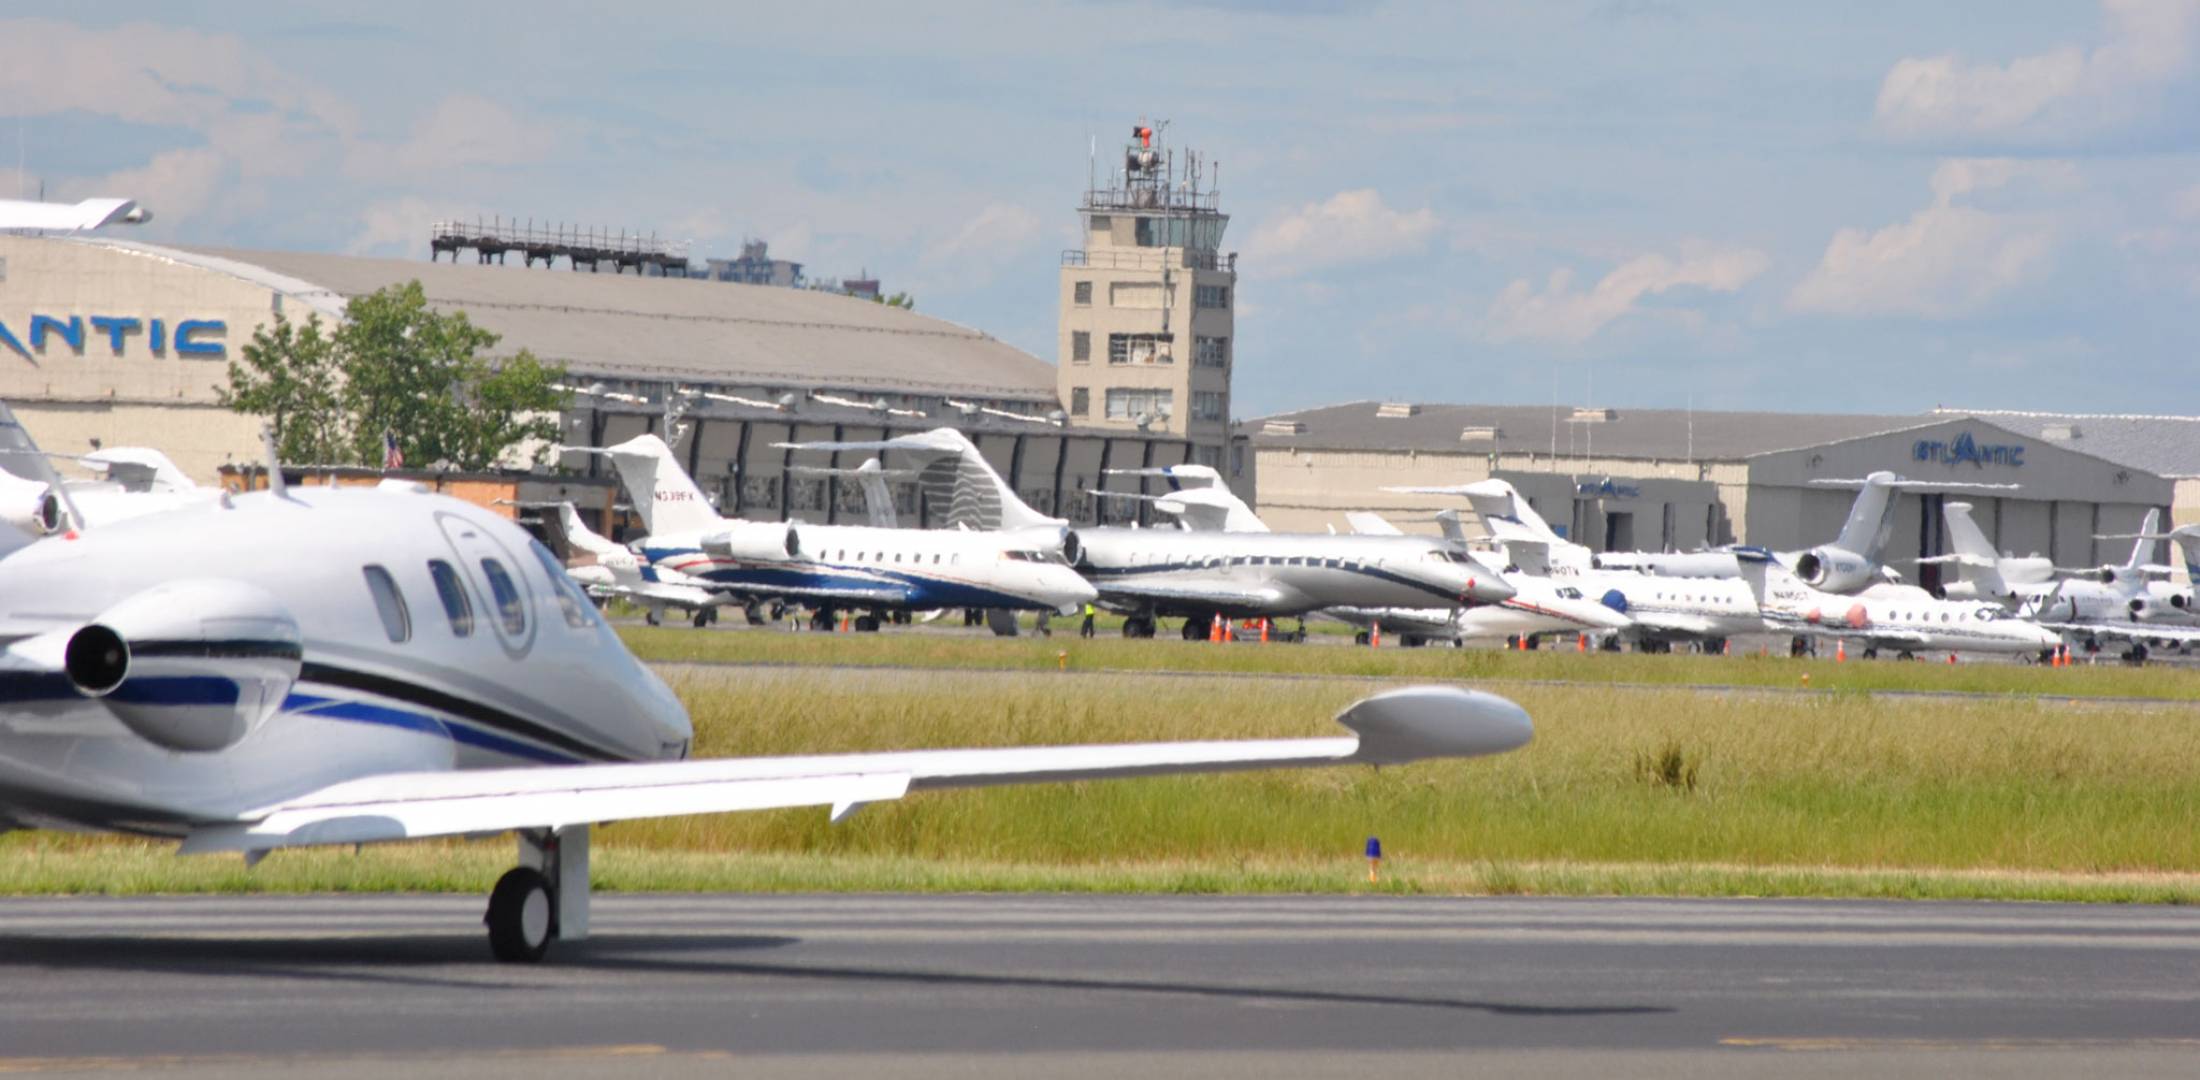 Testing Times At Teterboro: Closures and Challenges